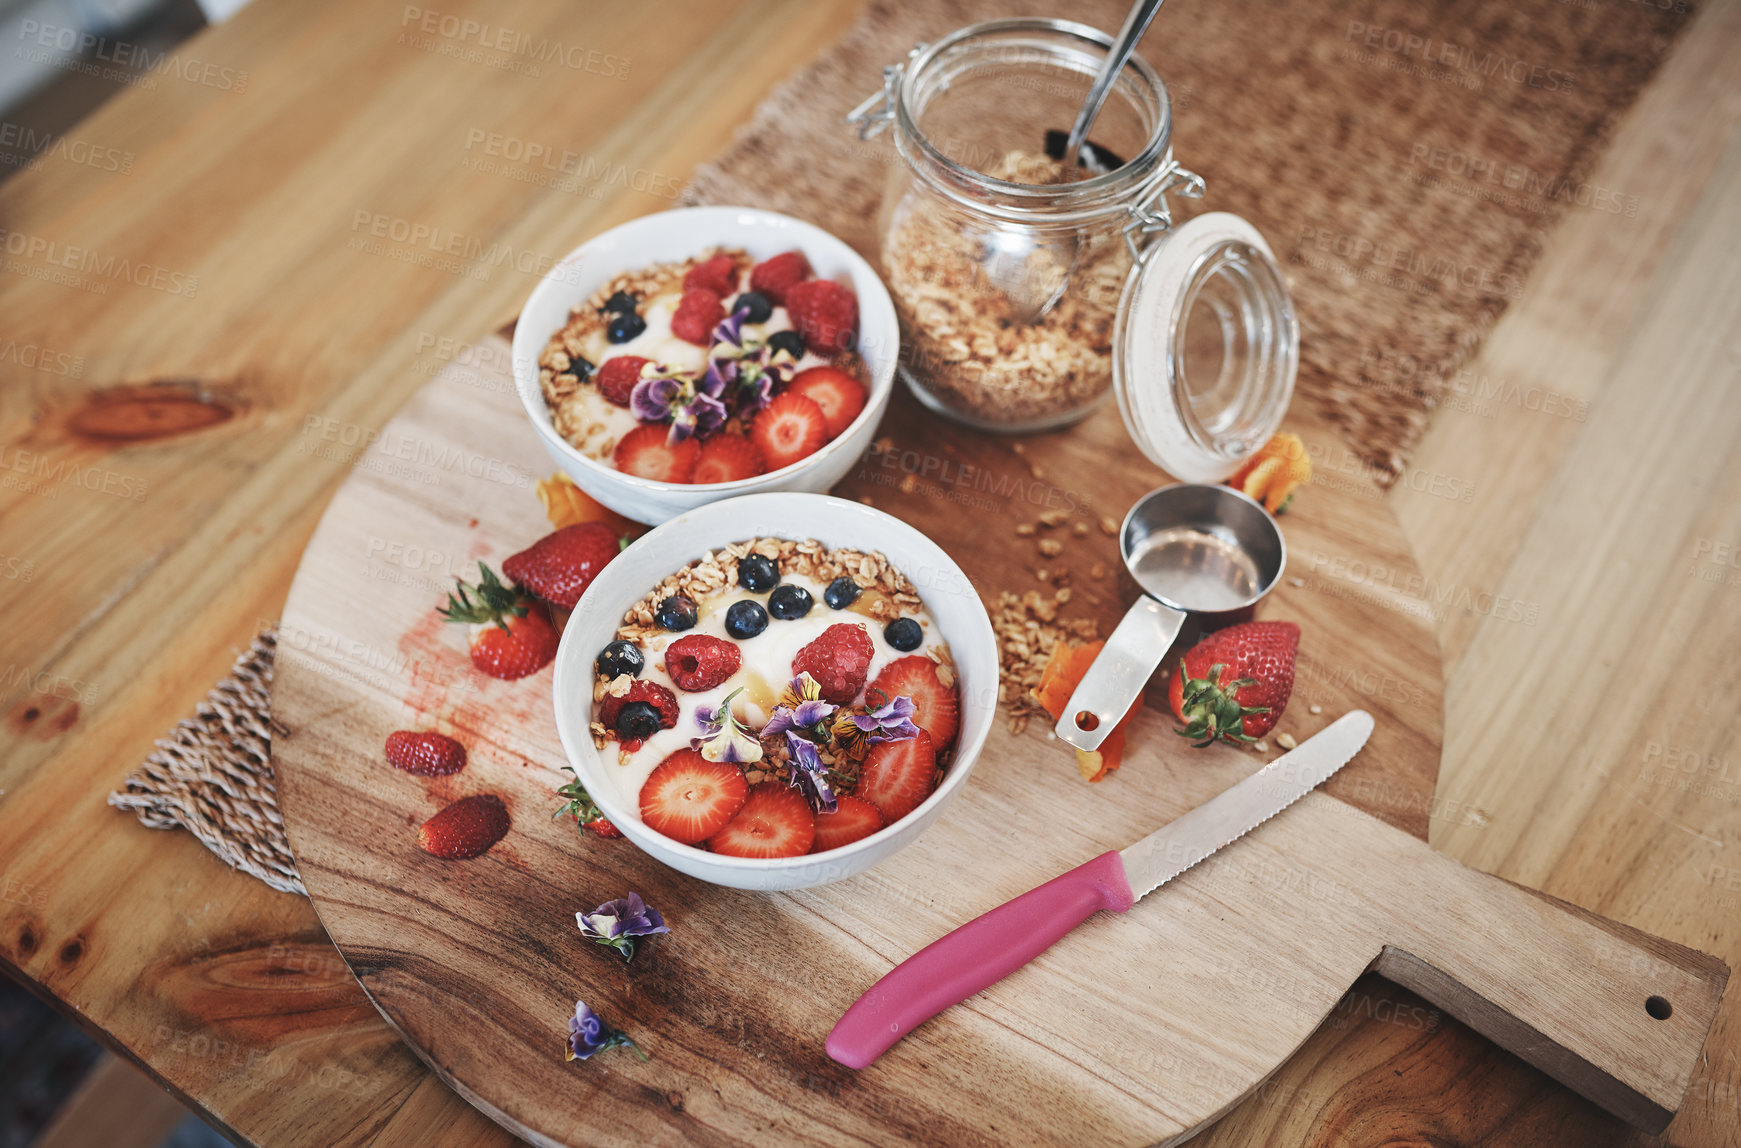 Buy stock photo Healthy breakfast, cereal and muesli diet above on table of fruit, wheat or oats for organic food or wellness at home. Bowls in brunch ready for dieting plan, nutrition or fibre meal on counter top